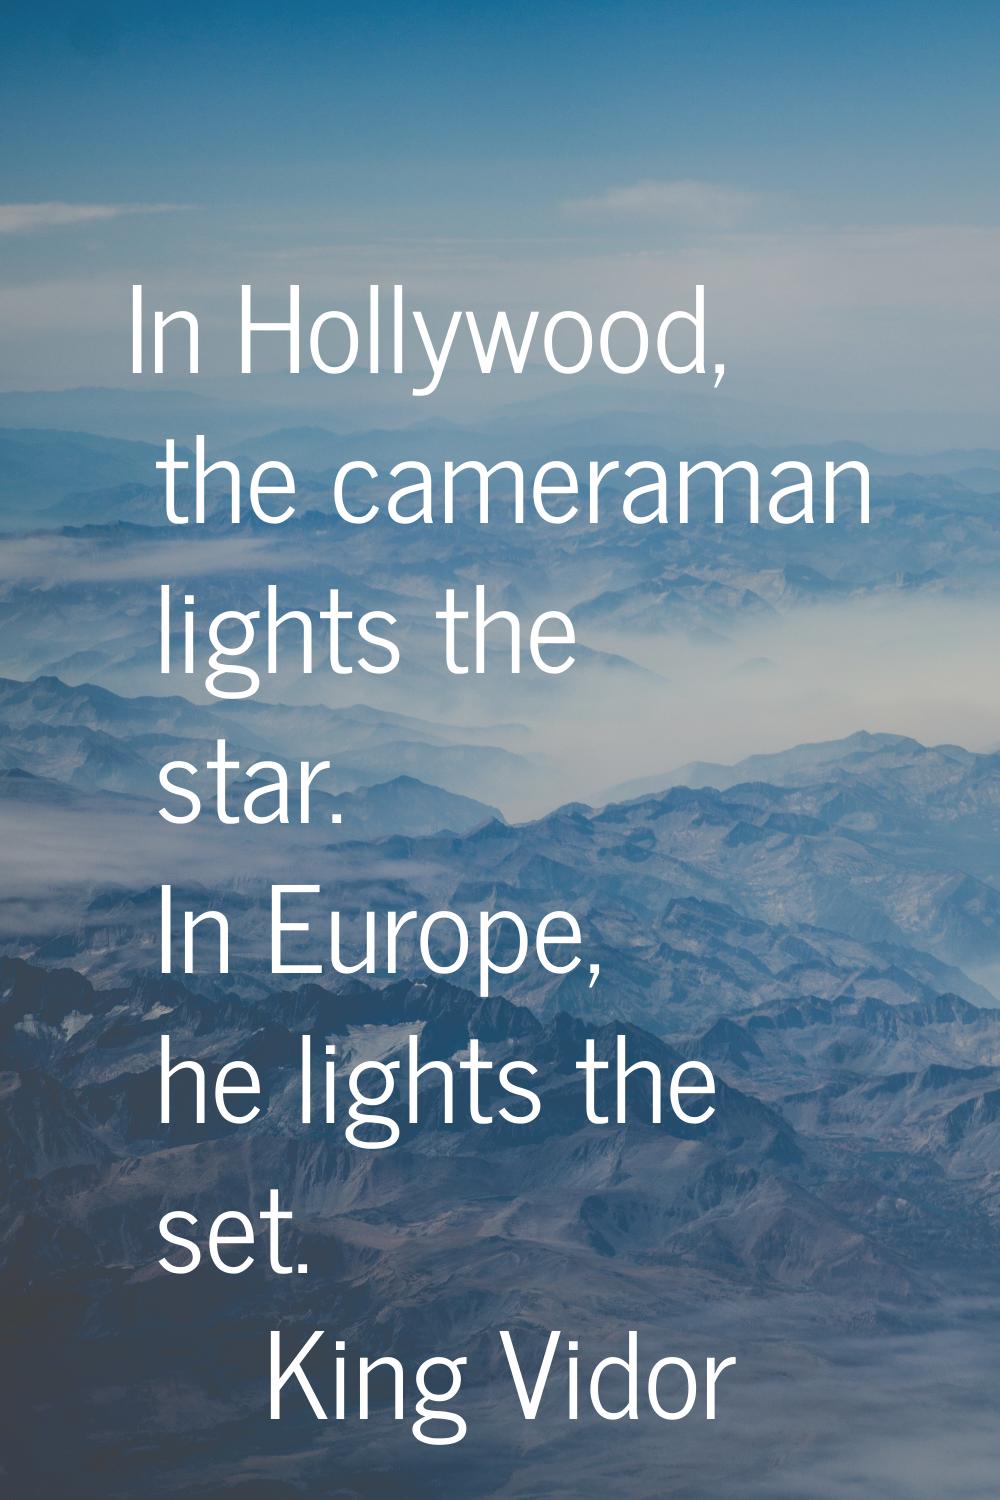 In Hollywood, the cameraman lights the star. In Europe, he lights the set.